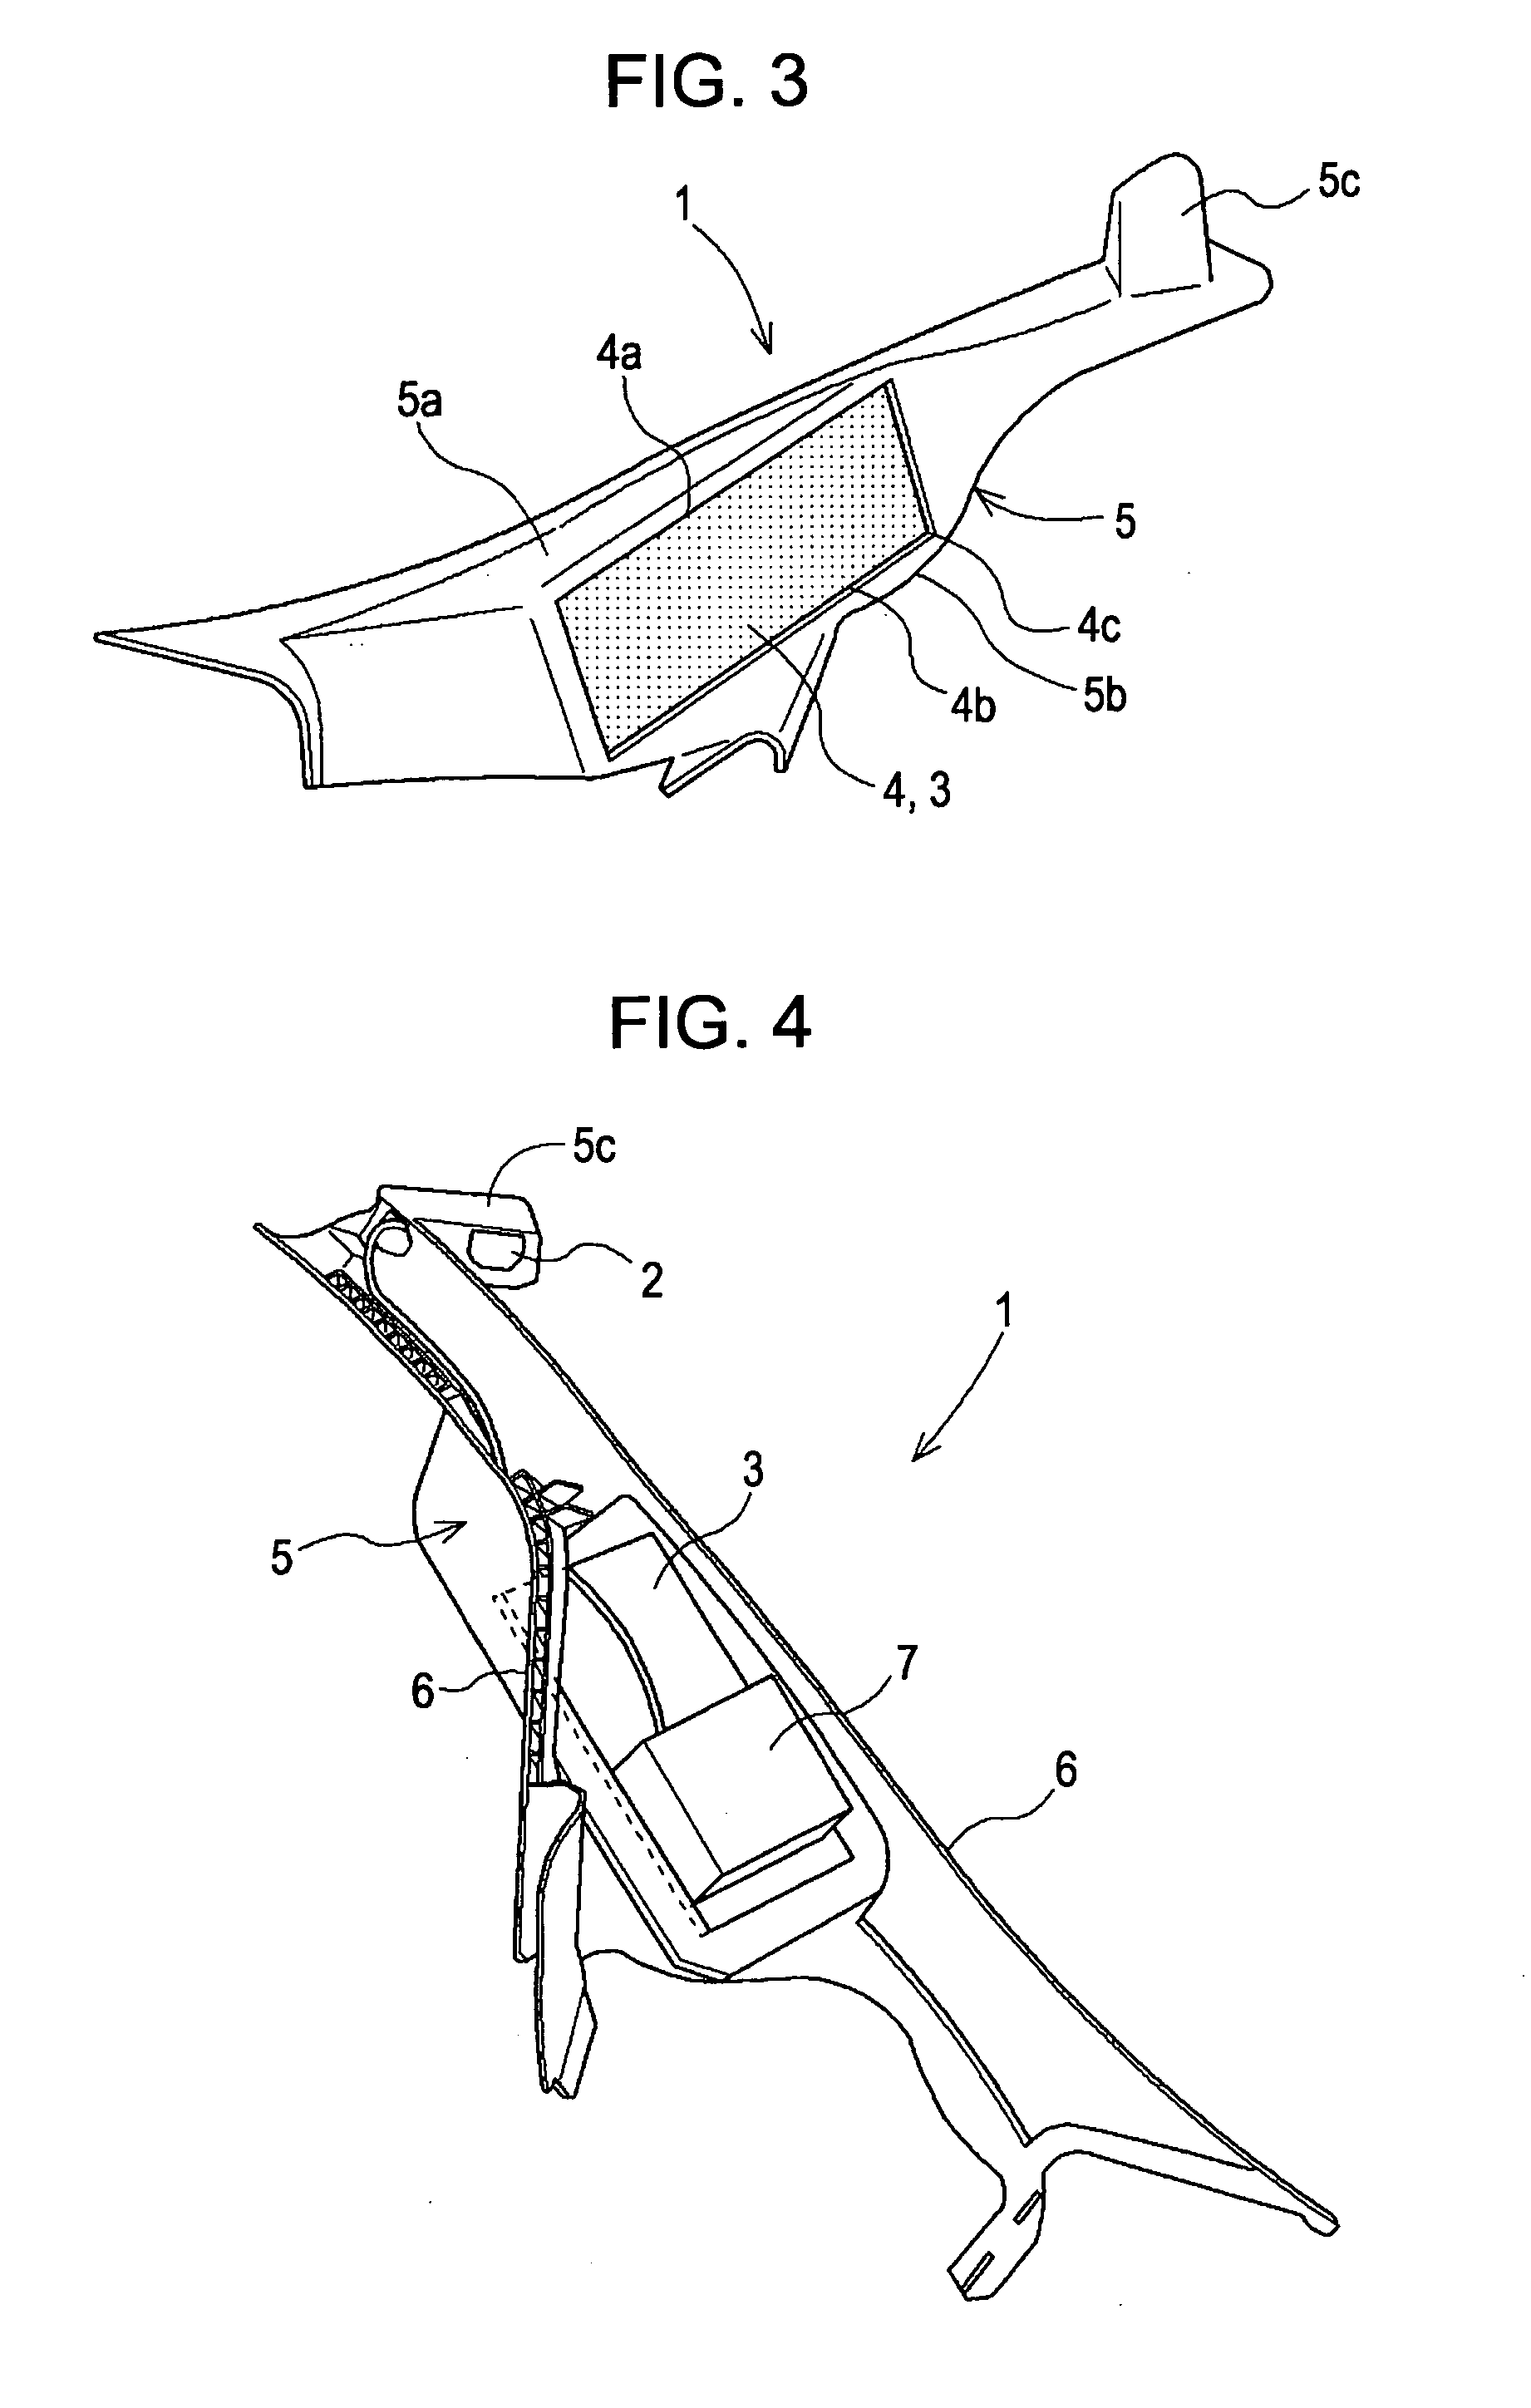 Driving assist apparatuses and methods